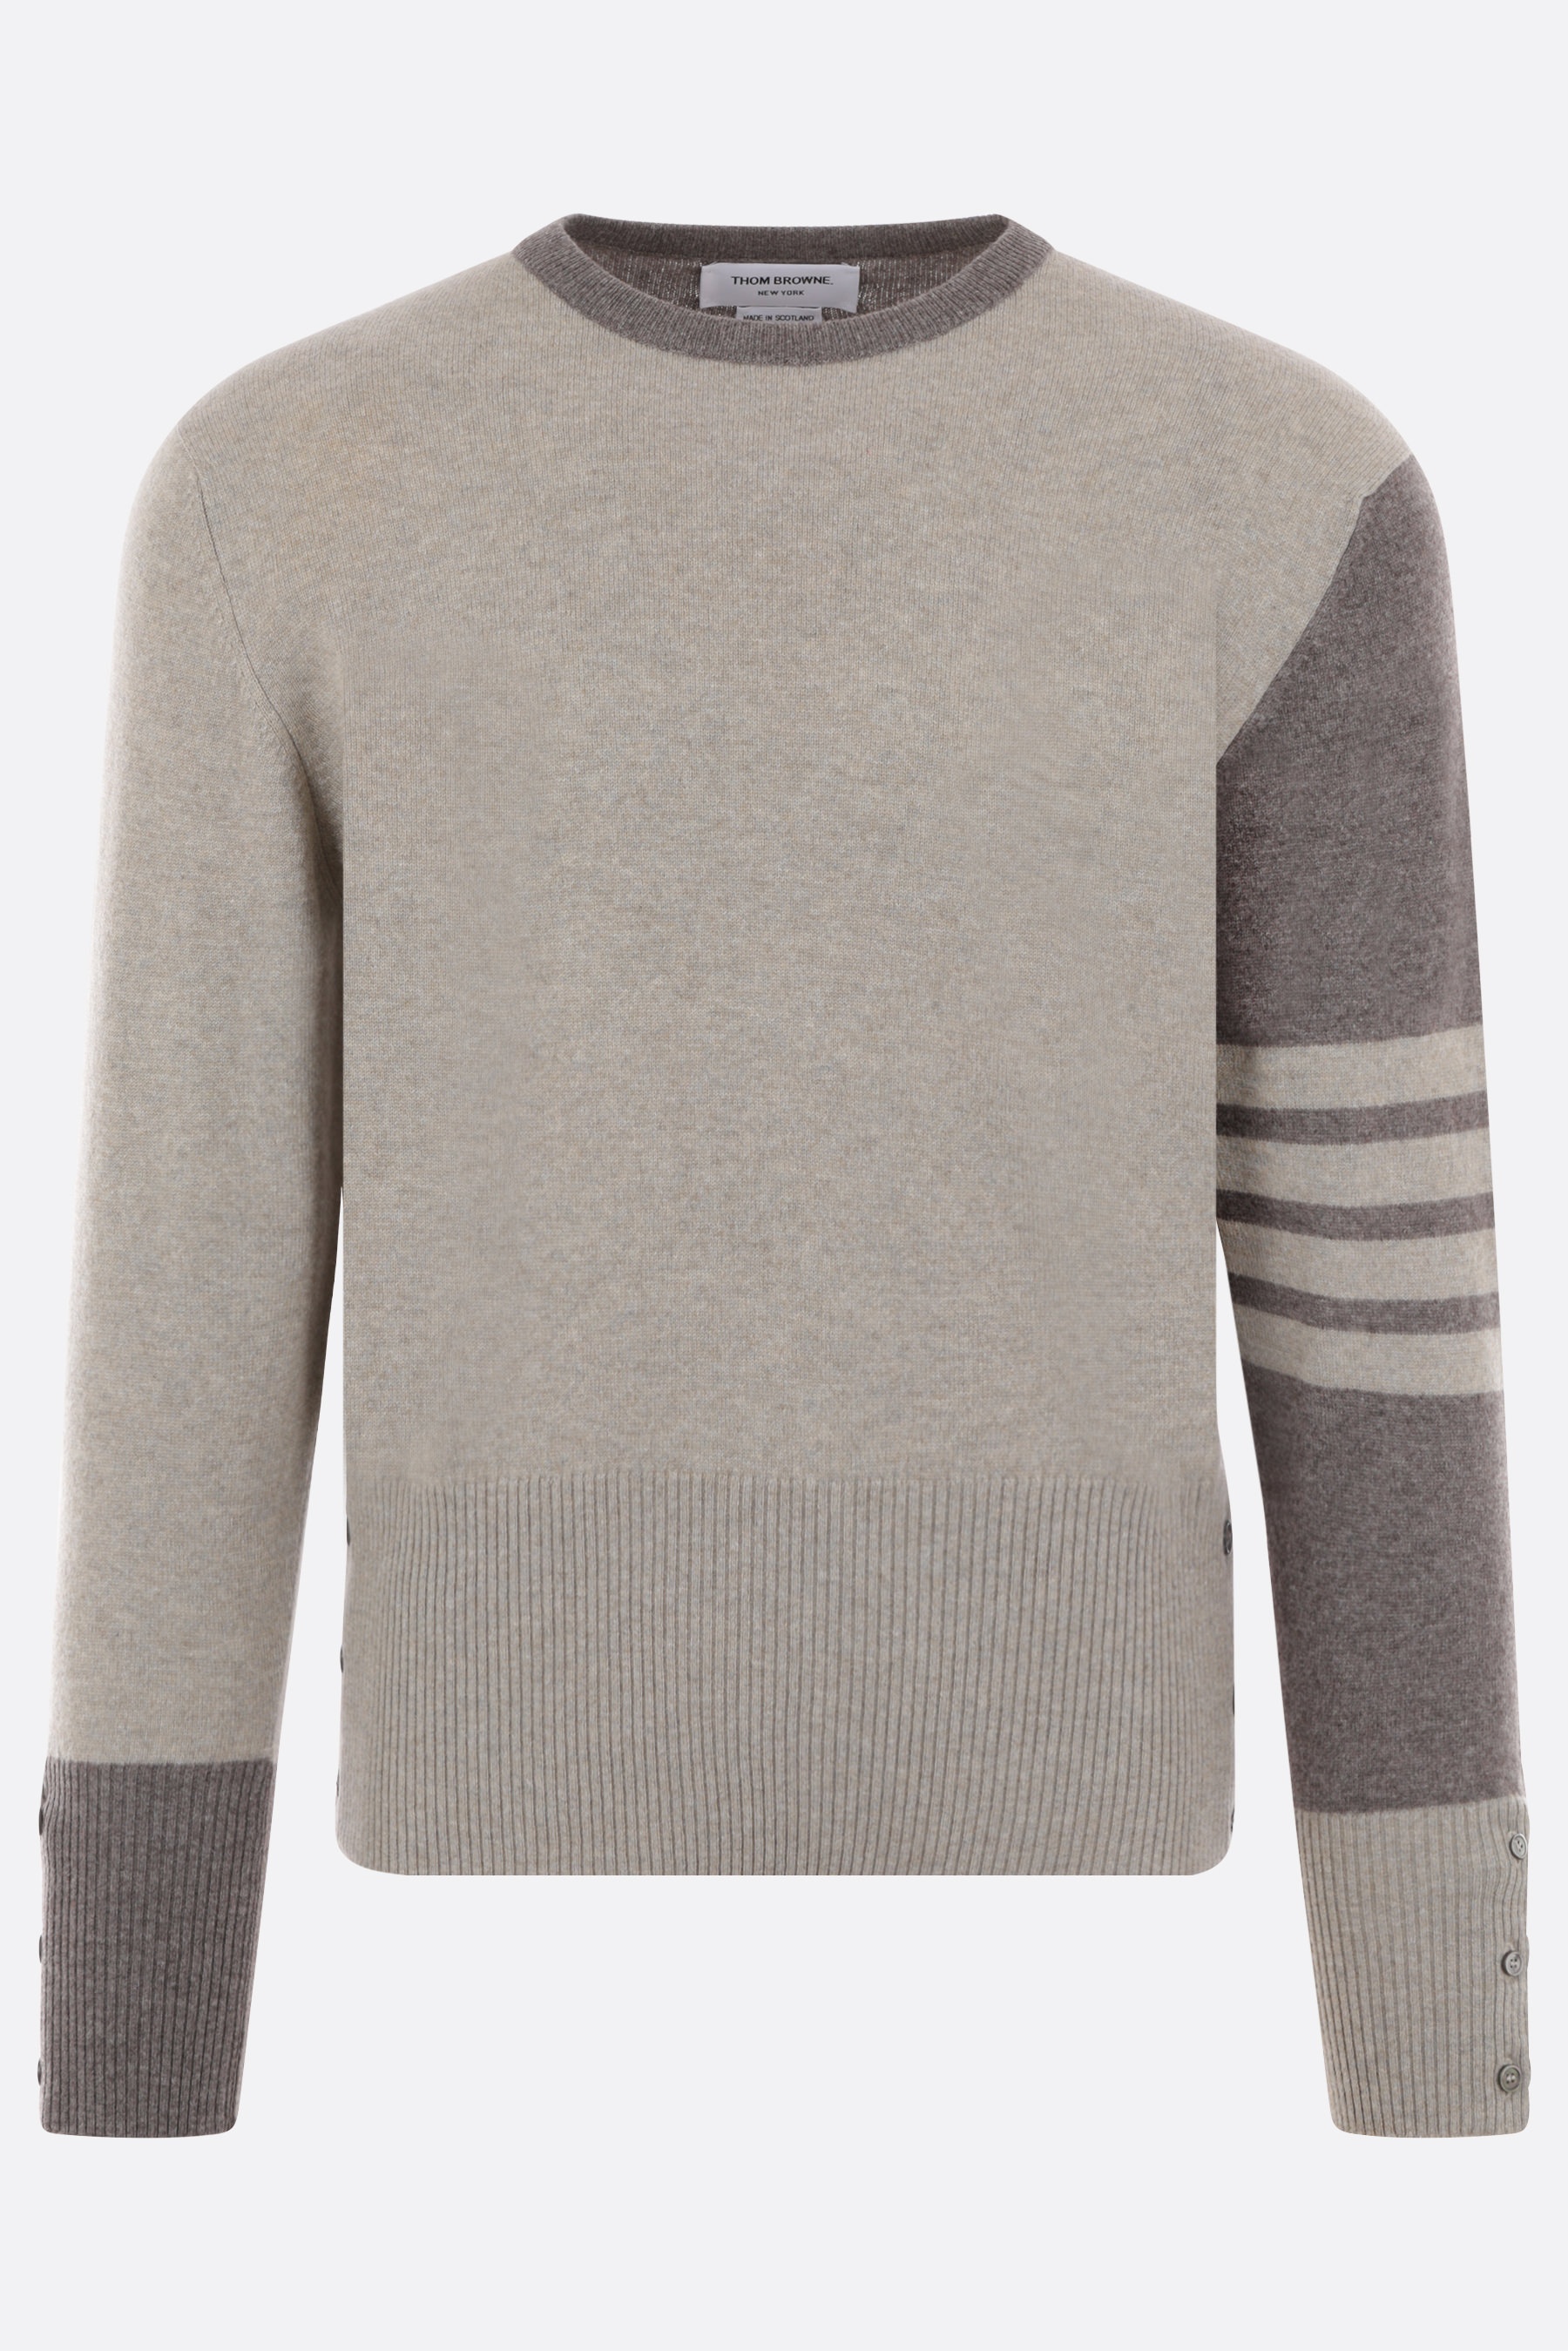 Thom Browne CASHMERE 4BAR PULLOVER | REVERSIBLE